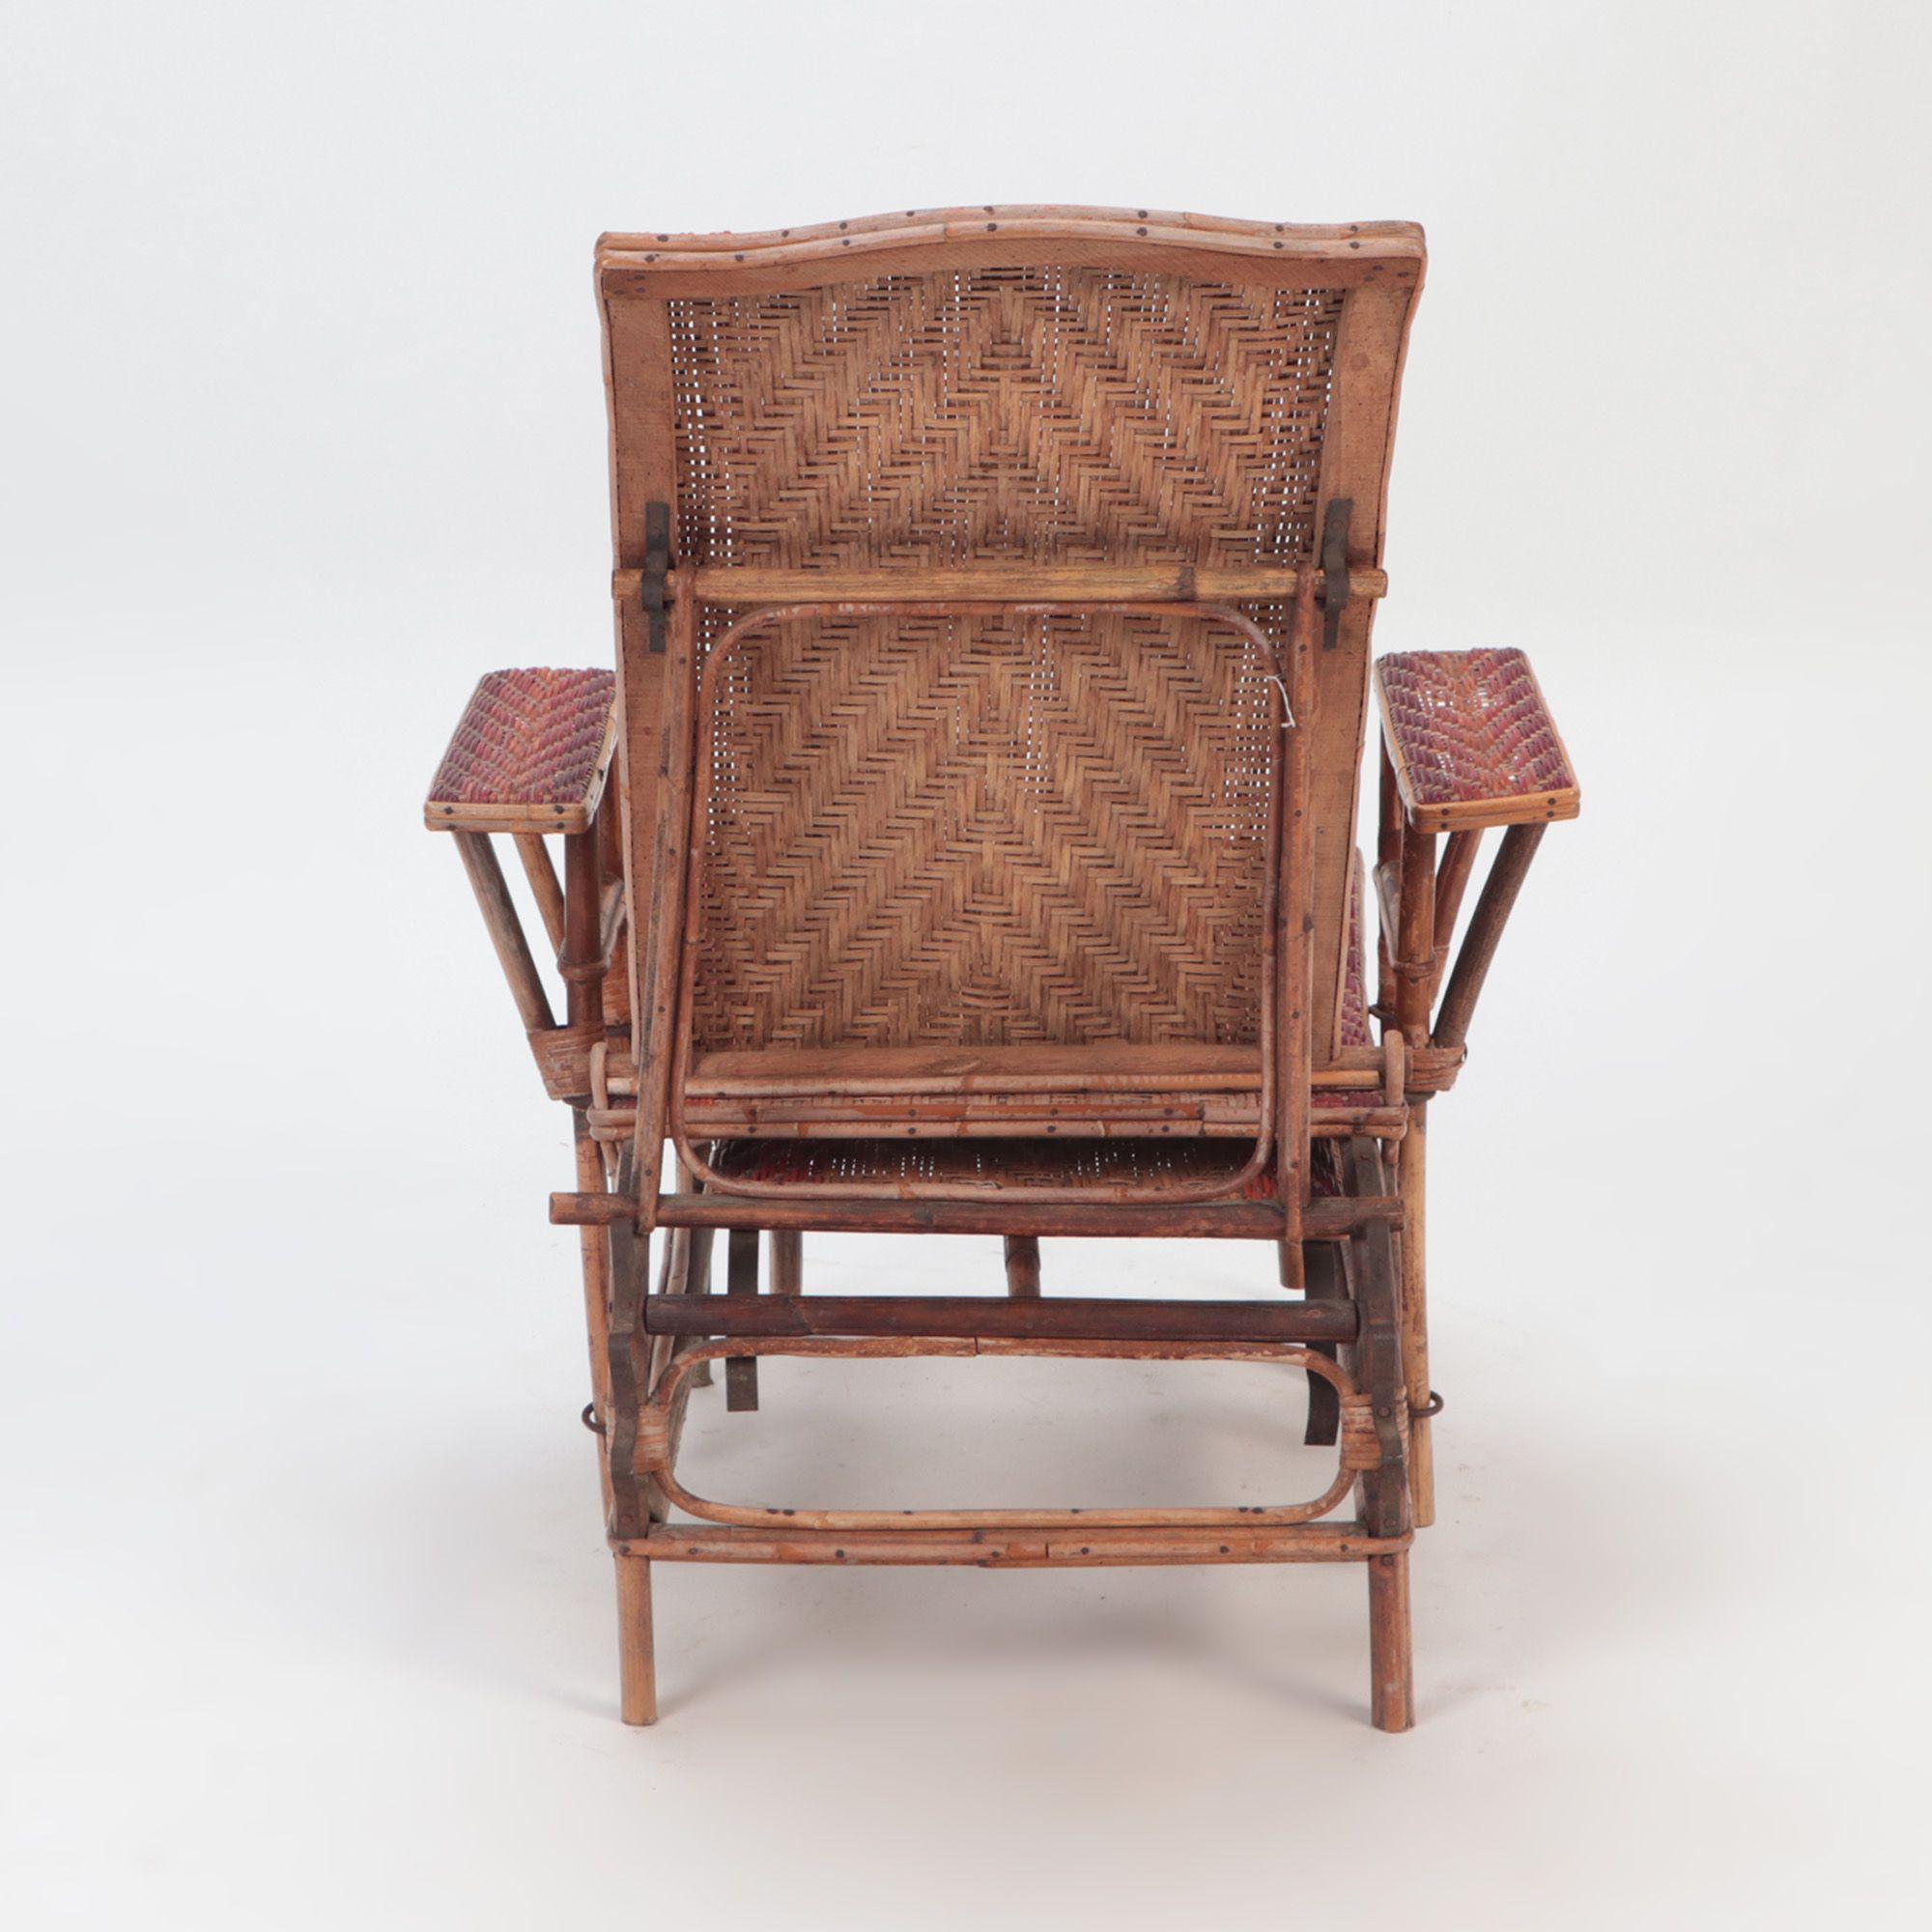 French Rattan Chaise Longue with Orange and Red Stripes, circa 1900 For Sale 3